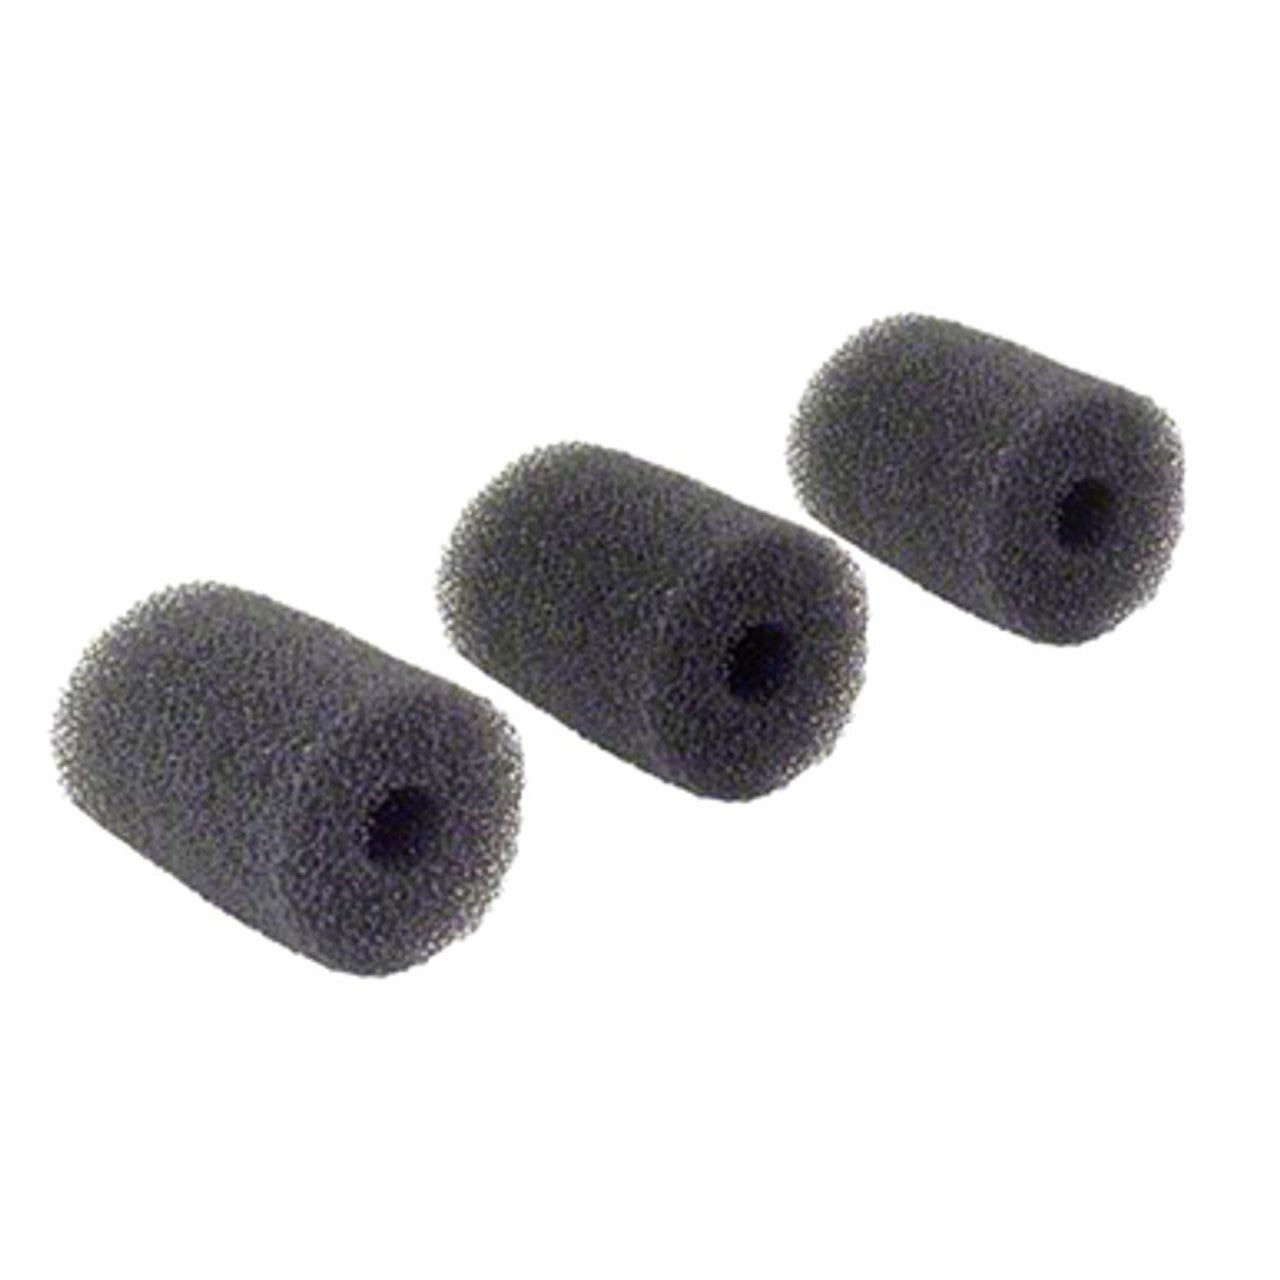 Jandy (Polaris) Vac-Sweep Hose Scrubber 3-Pack R0522400 - Cleaner Parts - img-1